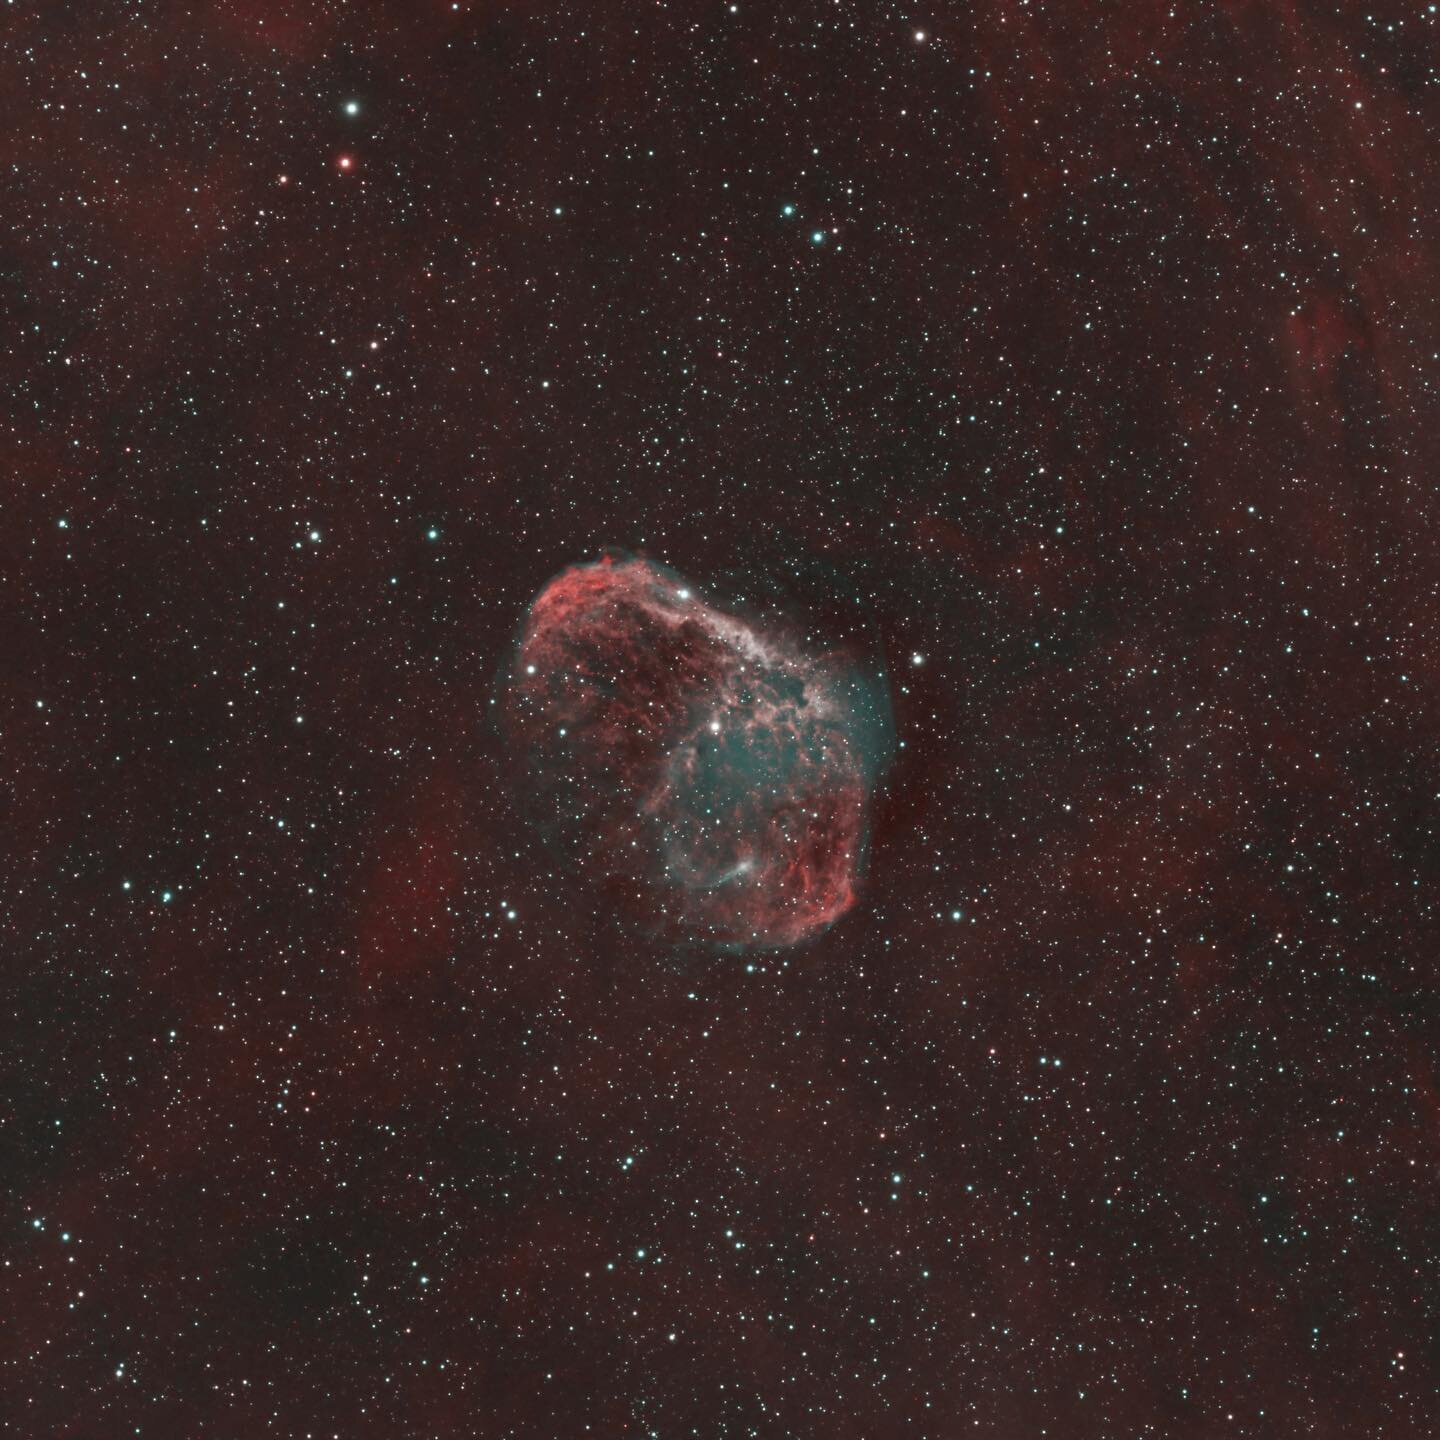 This is NGC 6888 known as &ldquo;The crescent nebula. #ngc6888  #crescentnebula #astrophotography #astrofotografia, #nightsky #nightskyphotography